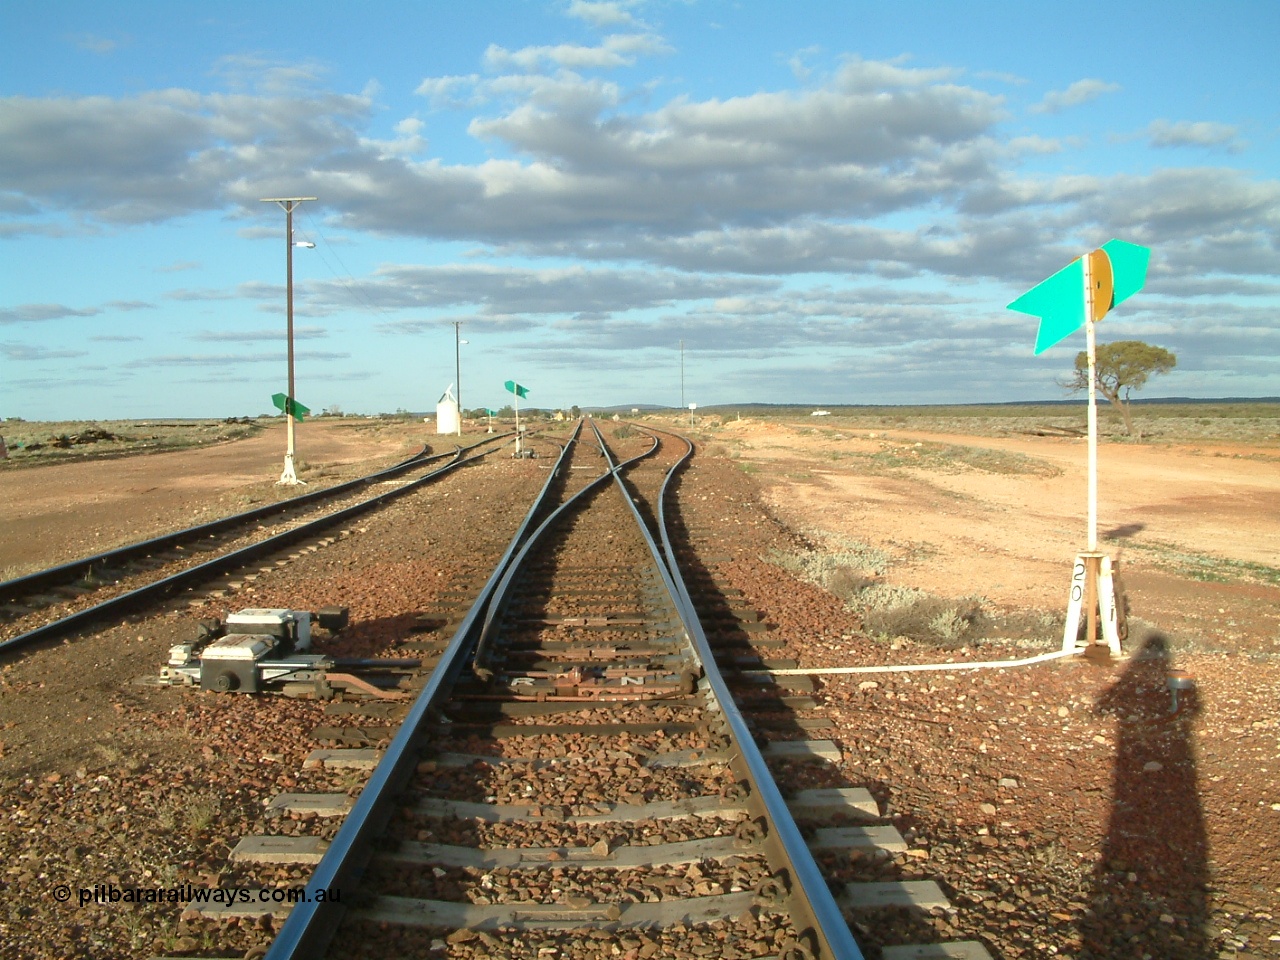 030415 171906
Tarcoola, at the 504.5 km, looking east along the Trans Australian line with the loop joining from the right and the Central Australian line on the left. Tarcoola is the junction for the TAR and CAR railways. [url=https://goo.gl/maps/qp85867GriDEnPyD7]GeoData location[/url]. 15th April 2003.
